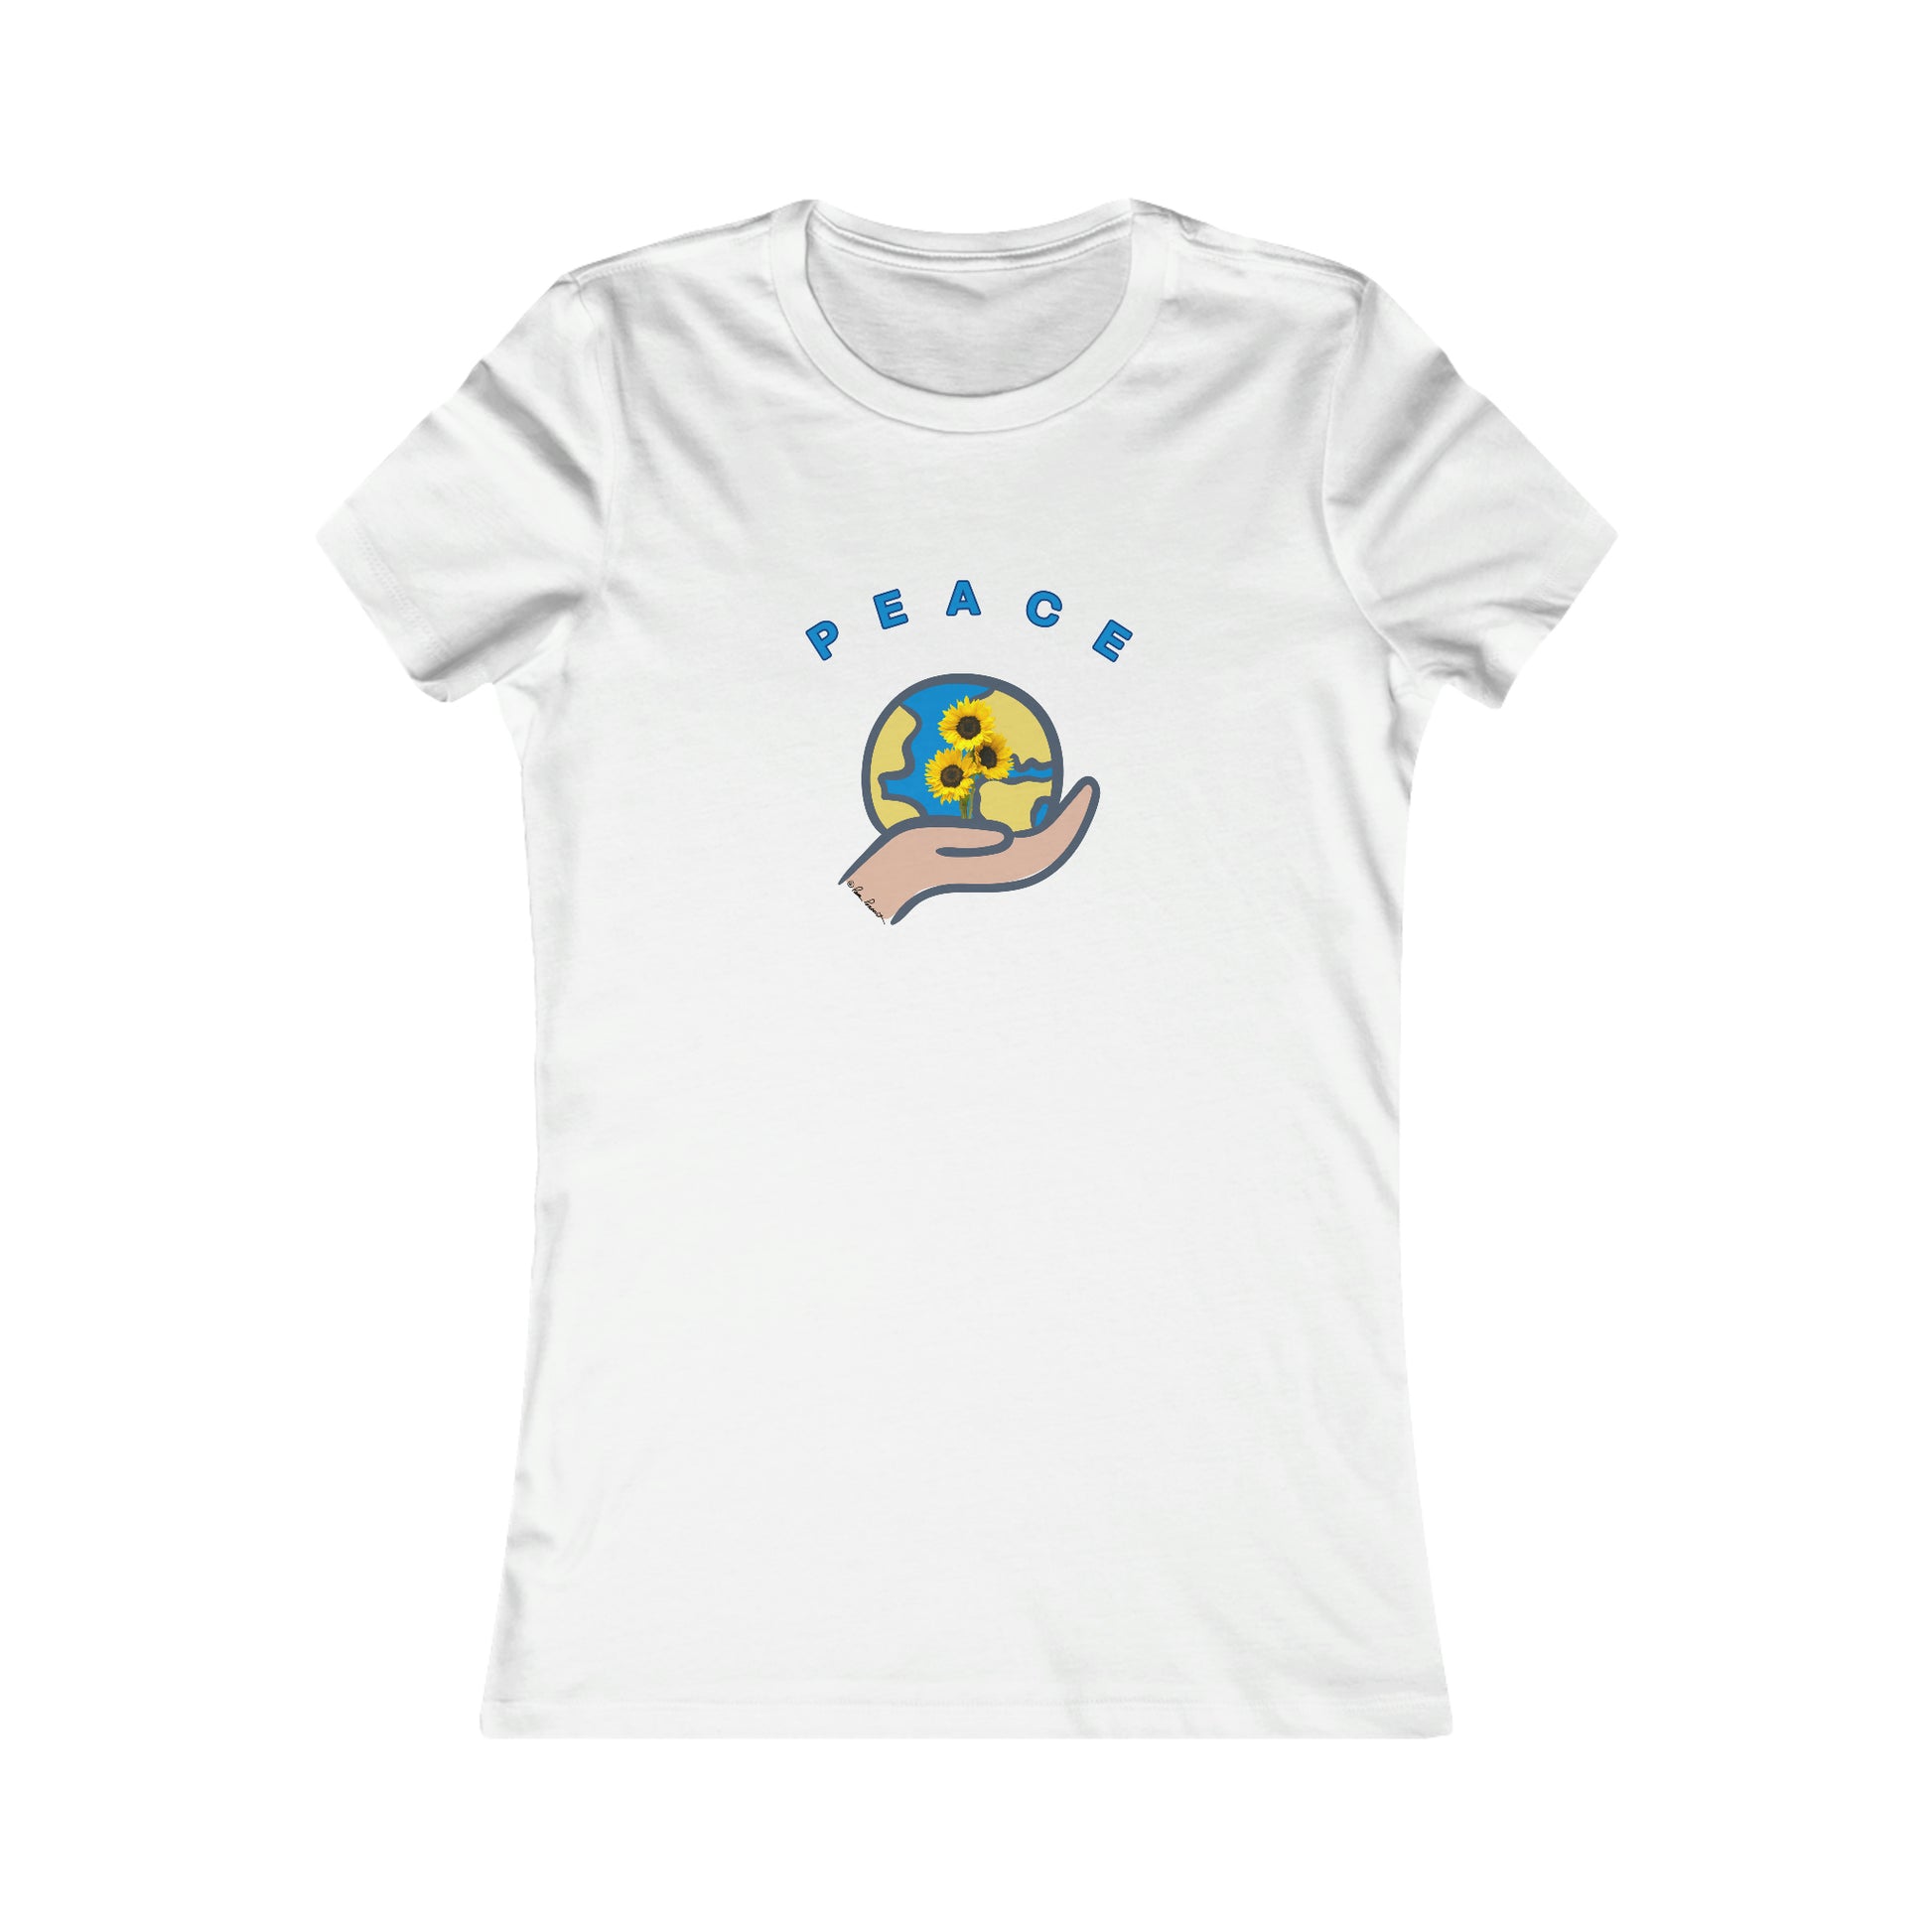 flat front view of the white t-shirt